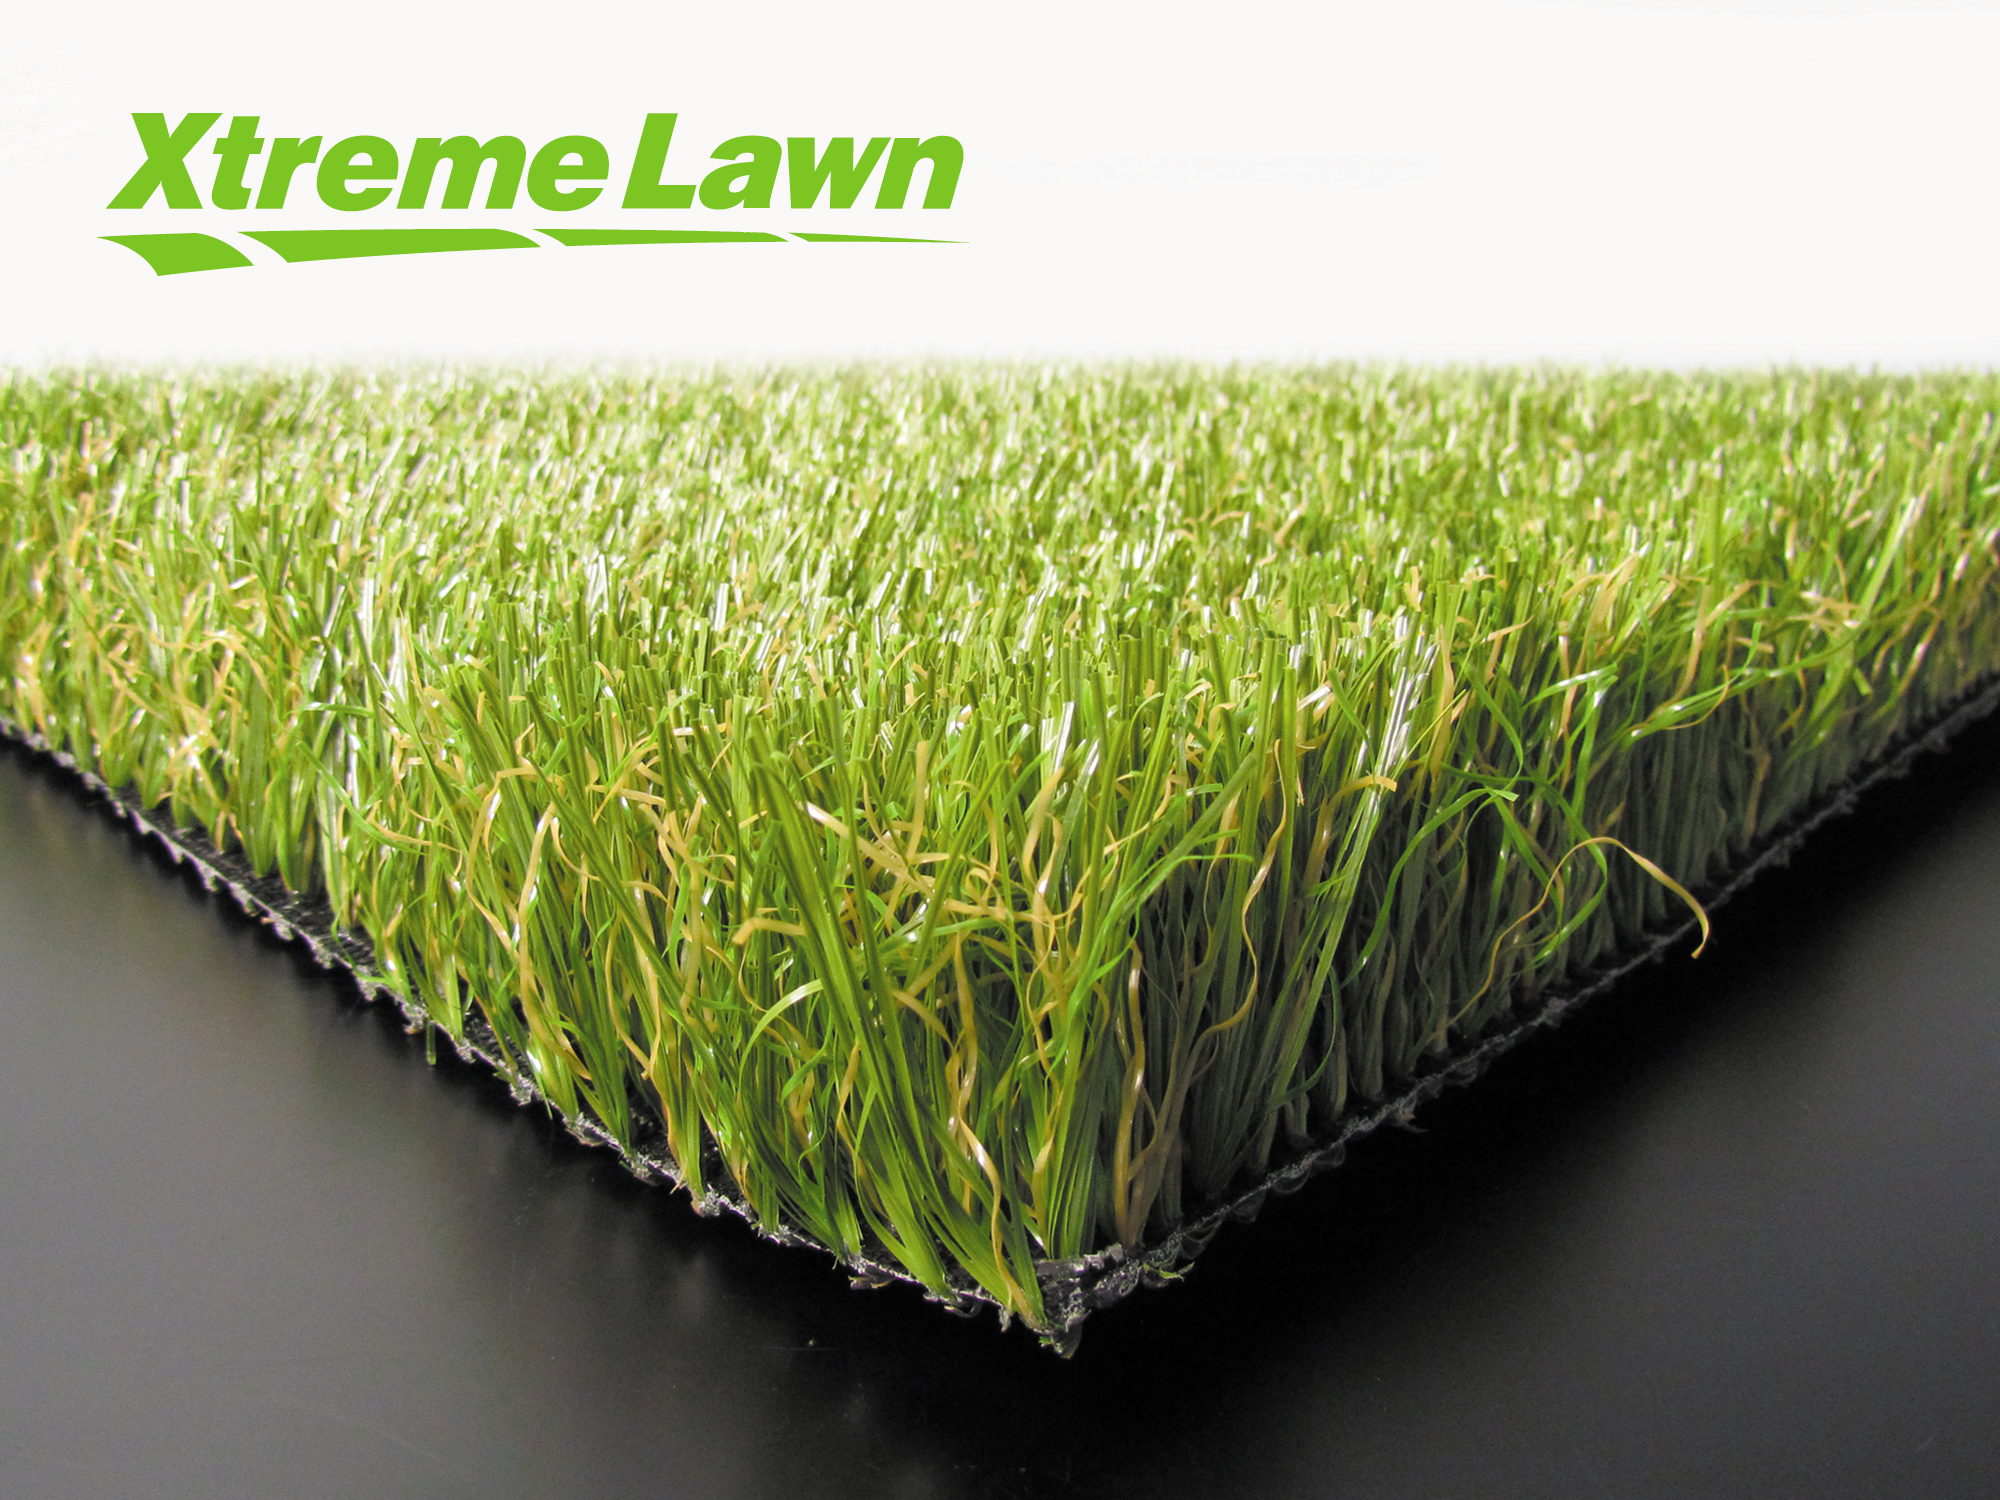 Xtreme Lawn synthetic grass offers high quality, durability and natural look.